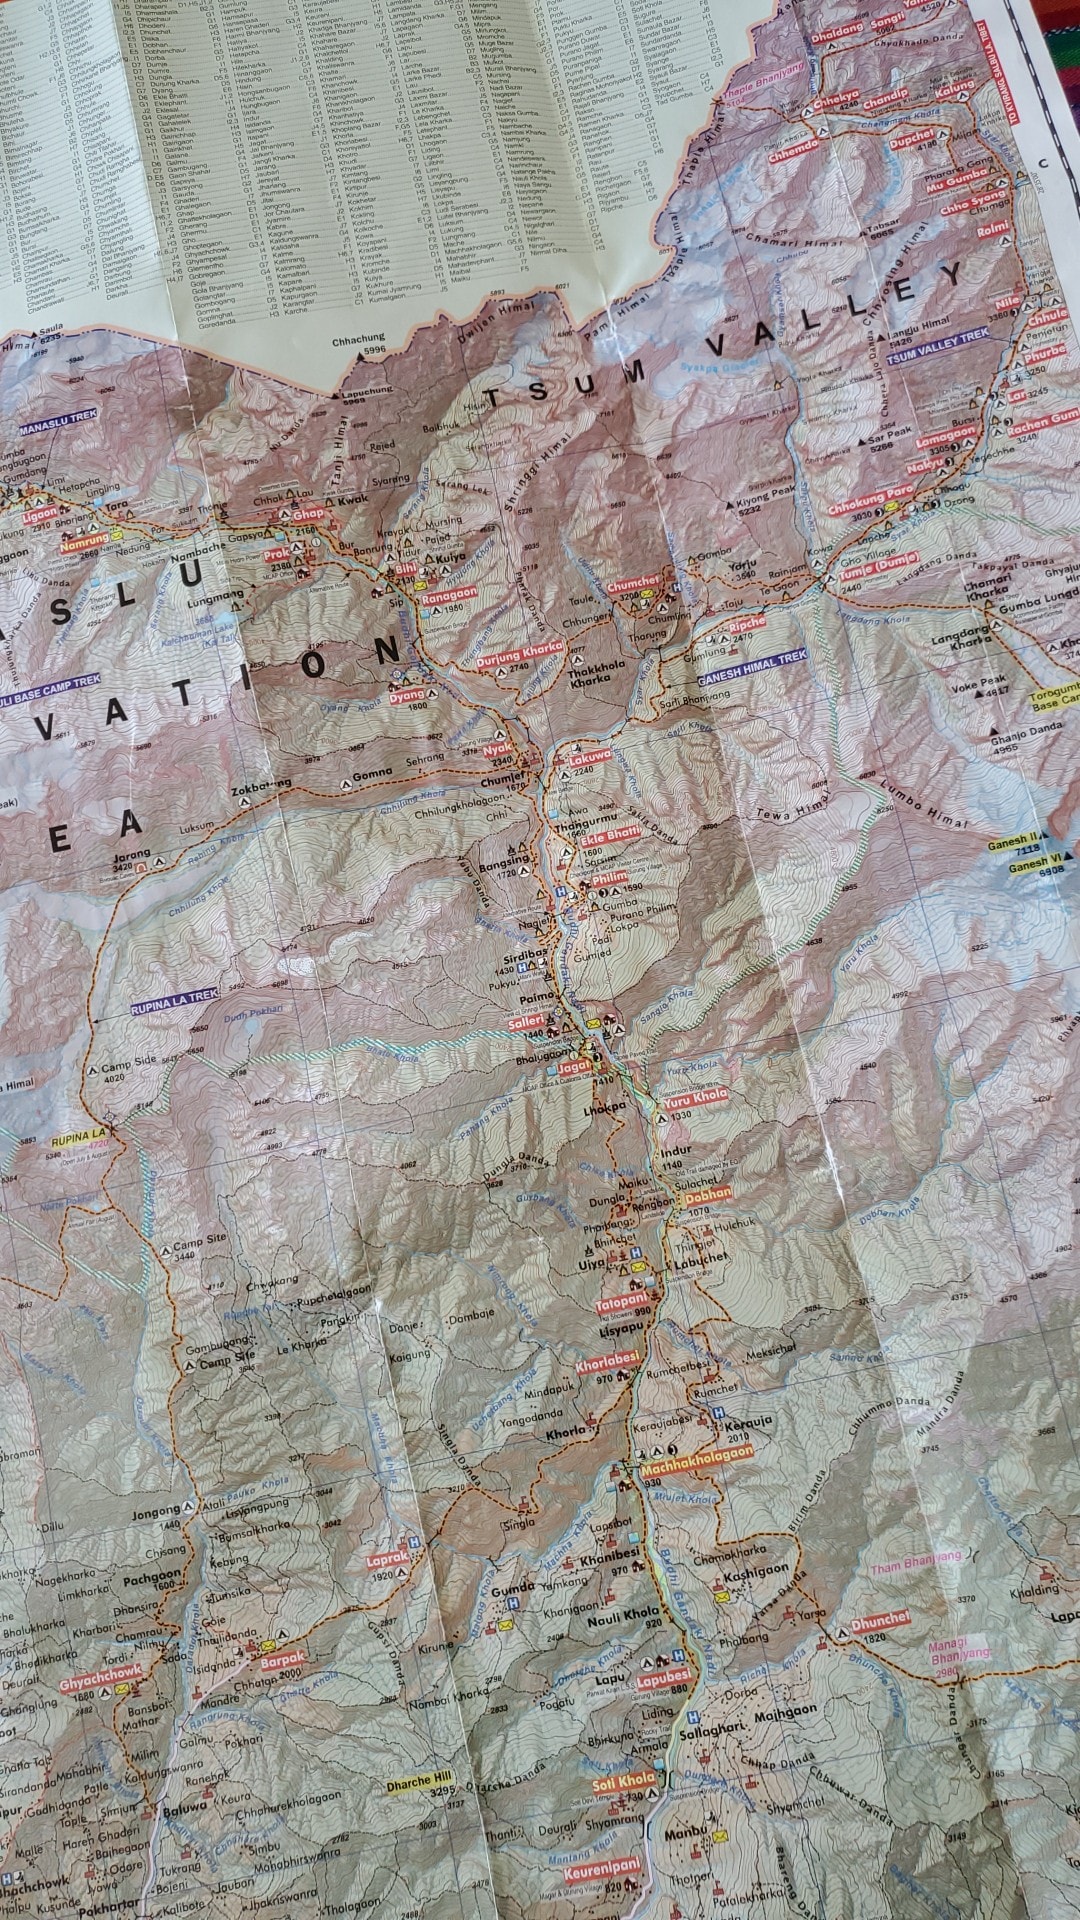 Map of the Tsum Valley